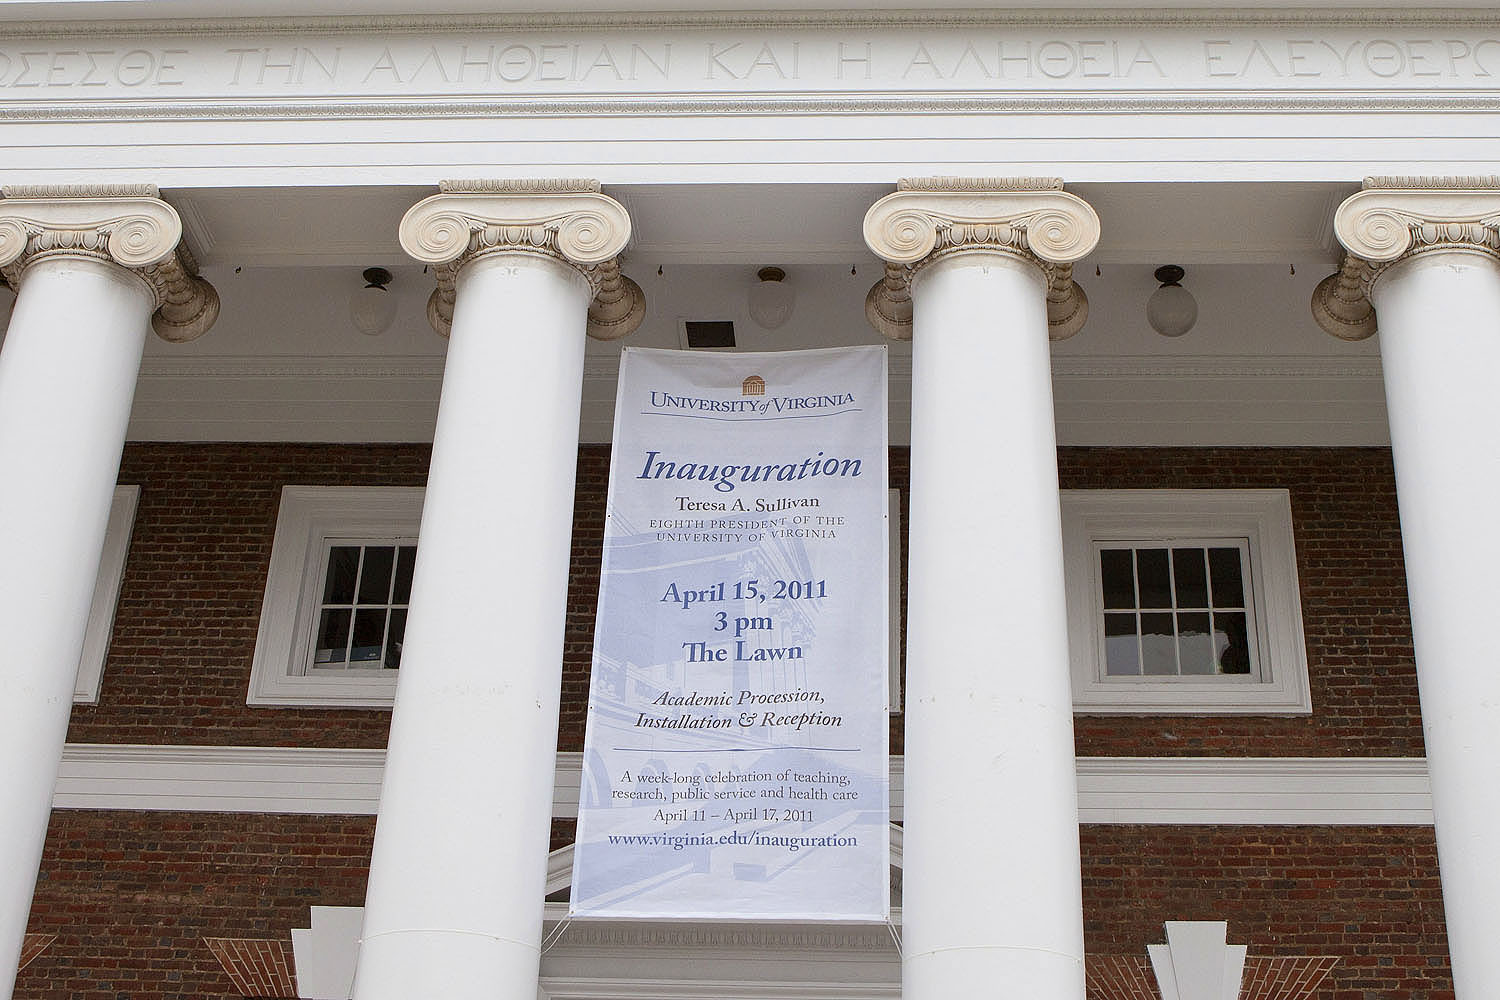 Inaugural banner hanging between the columns of Old Cabell Hall